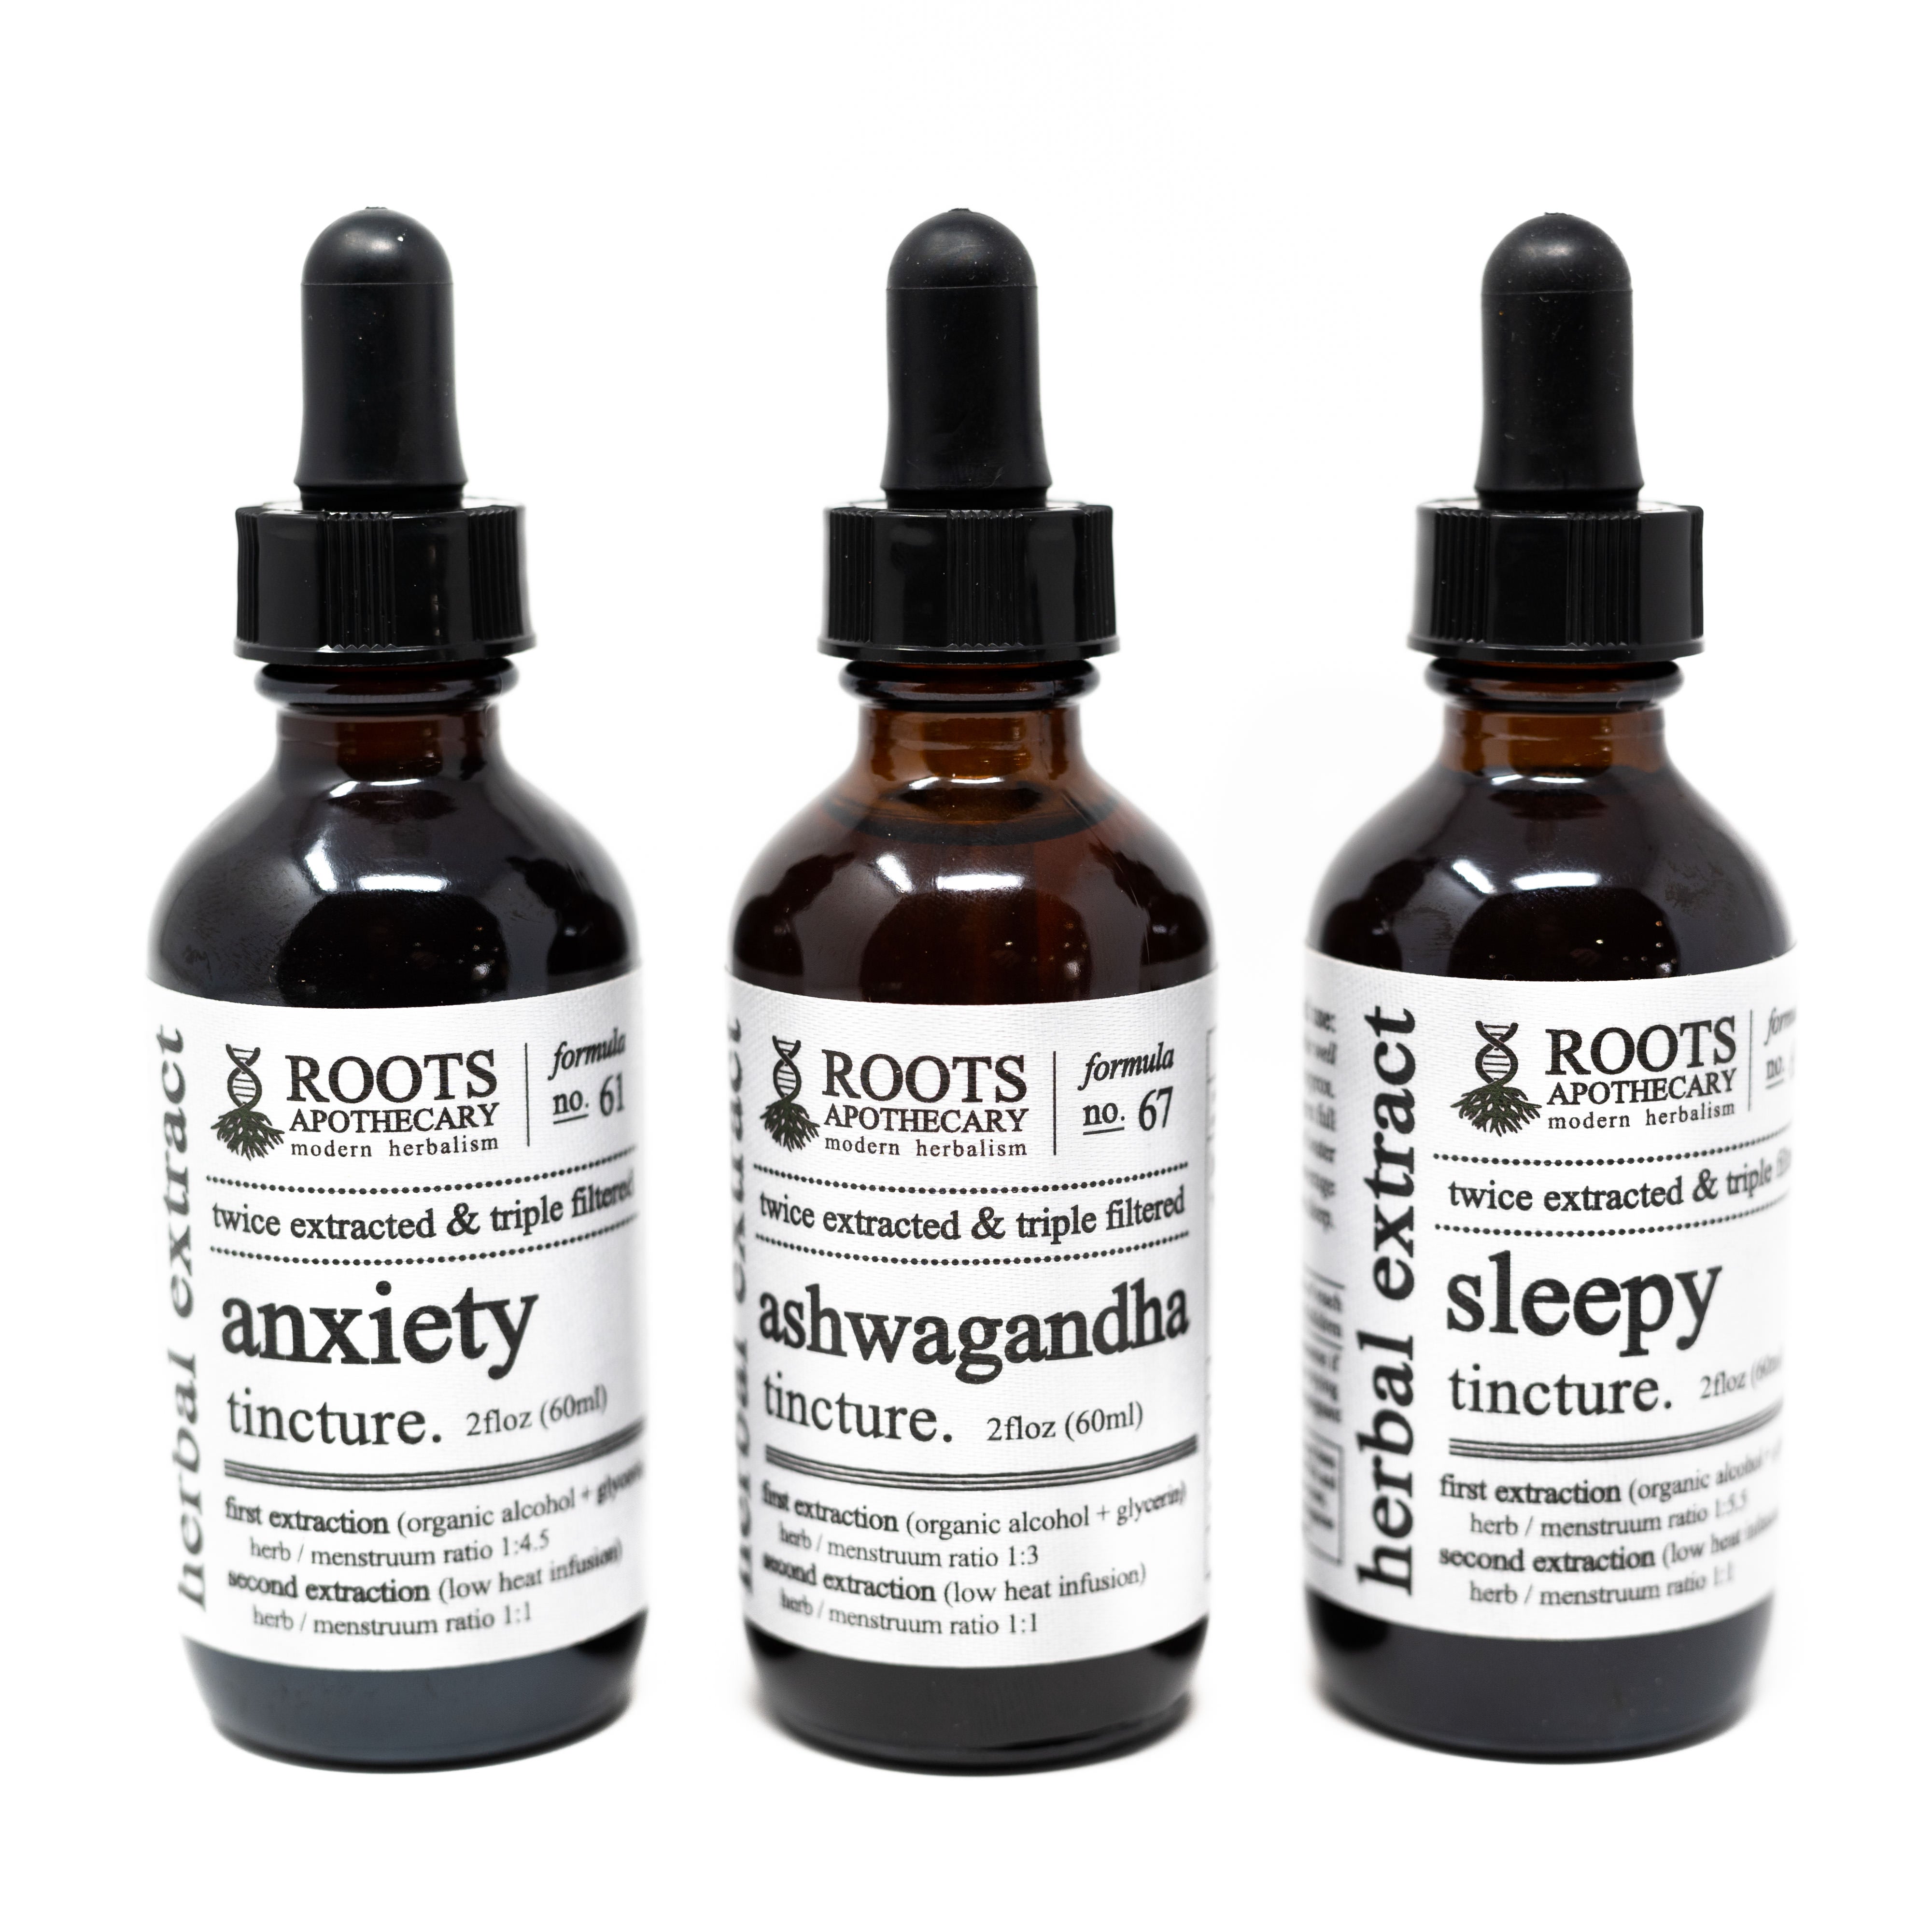 CALM Tincture - Potent Extract for Anxiety Relief, Curbing Effects